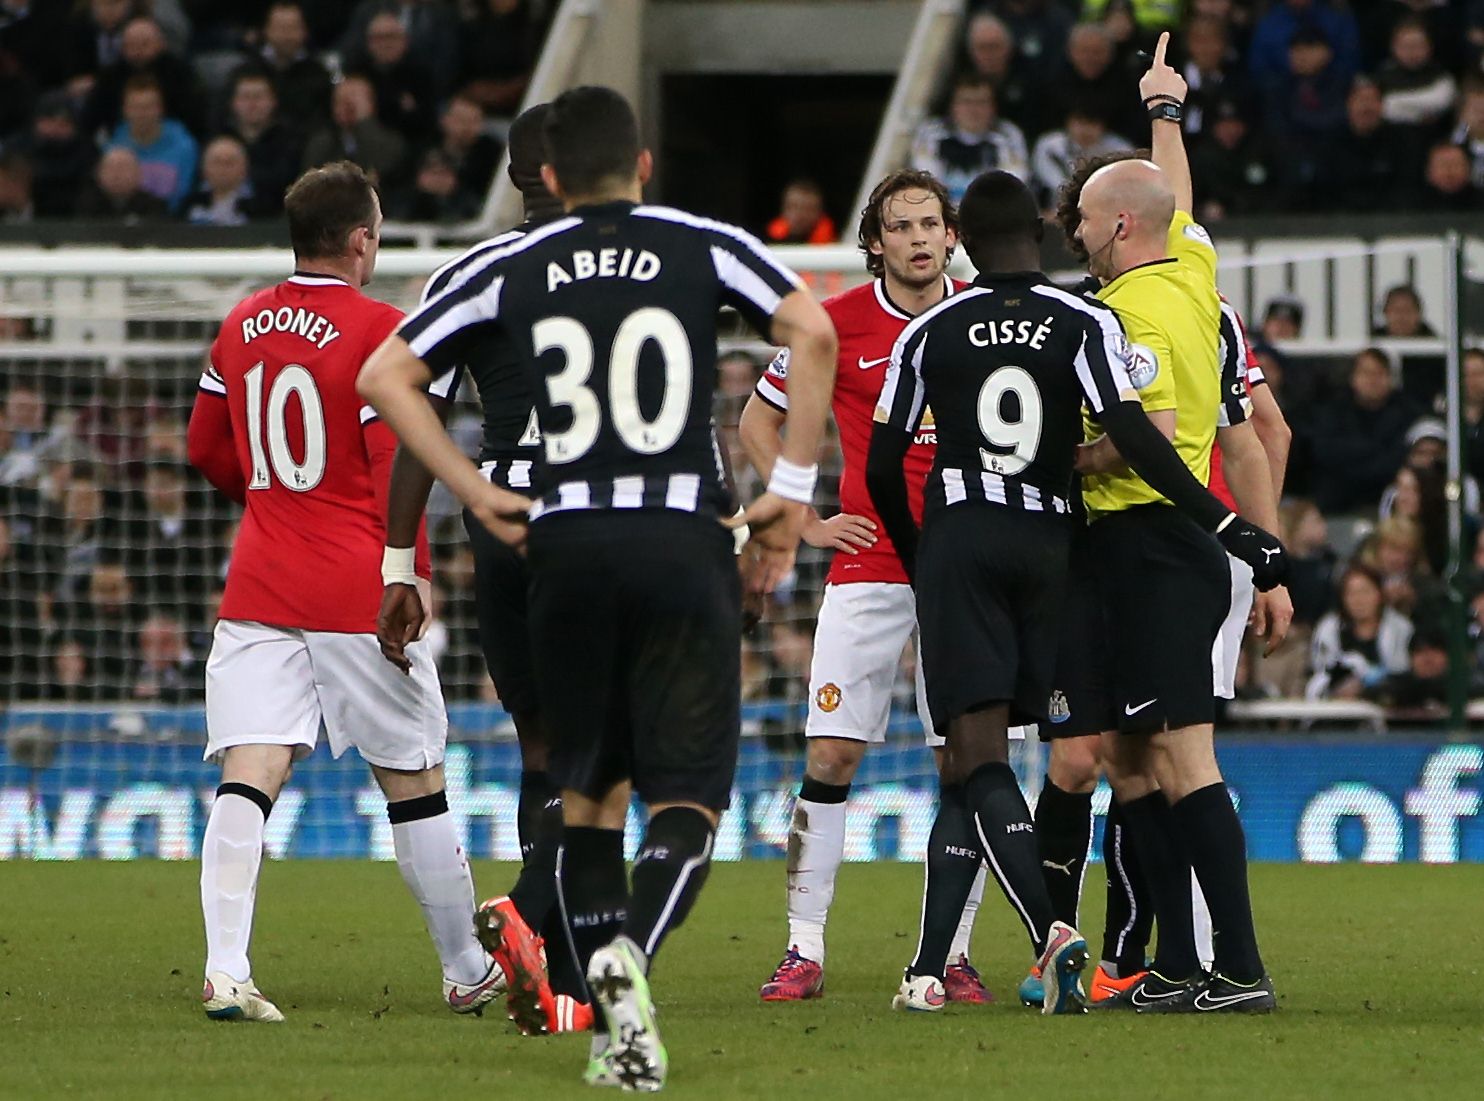 The referee reacts after a clash of Manchester United defender Jonny Evans with Newcastle striker Papiss Cisse. Photo: AFP